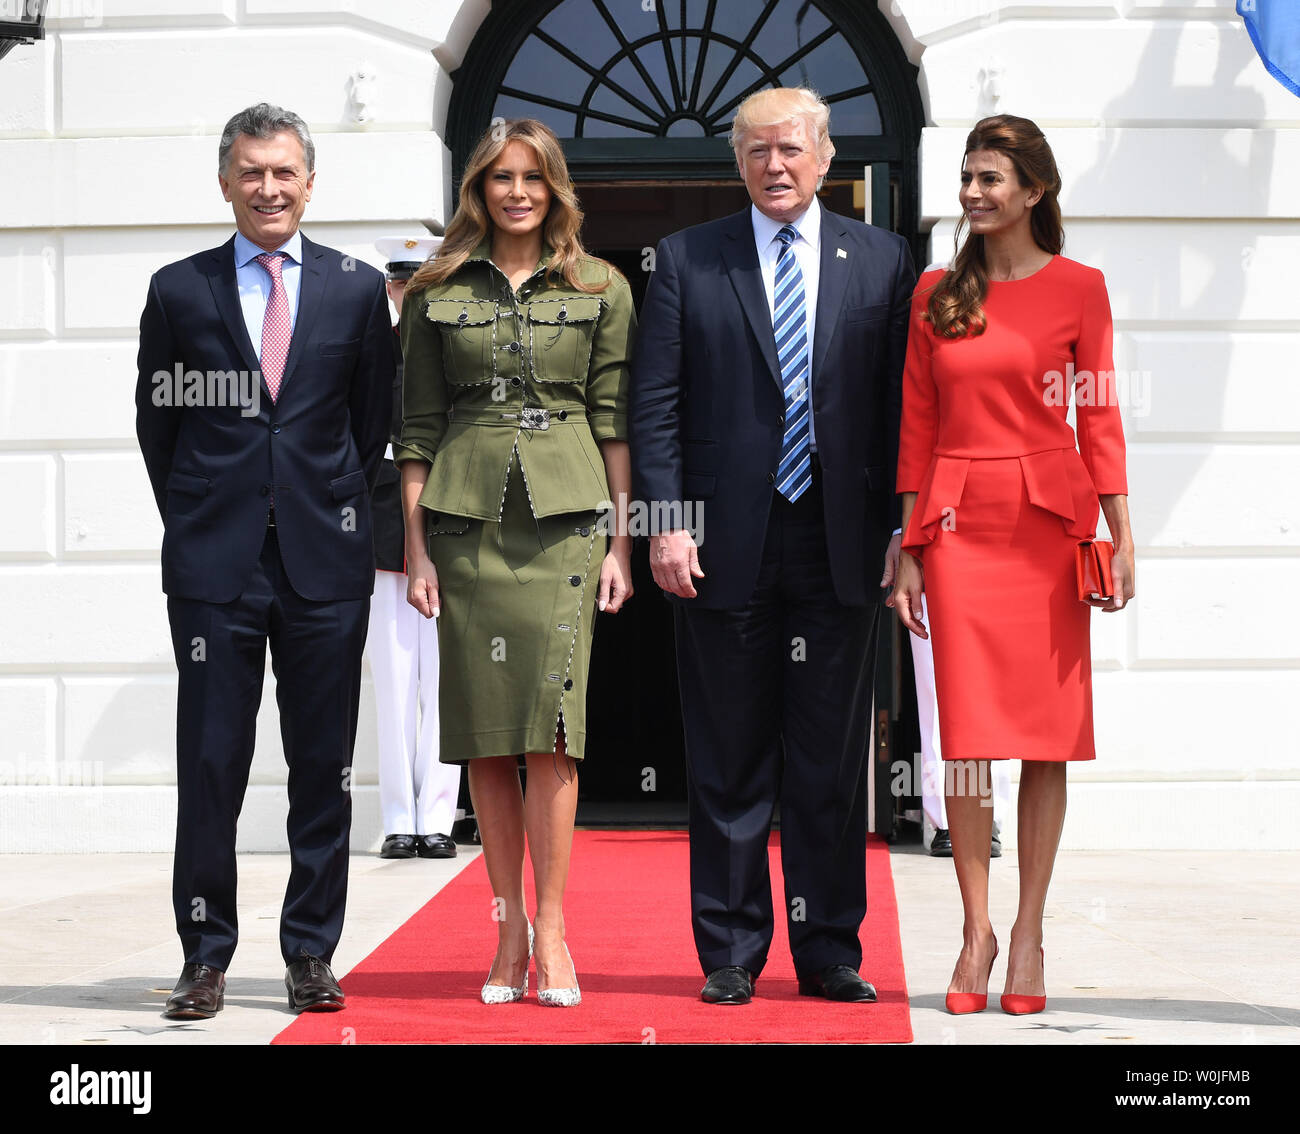 U.S. President Donald Trump and First Lady Melania greet Argentine President Mauricio Macri (L) and his wife Juliana Awada (R) upon arrival at the South Portico of the White House in Washington, DC on April 27, 2017.  Macri is in town for talks with Trump.     Photo by Pat Benic/UPI Stock Photo